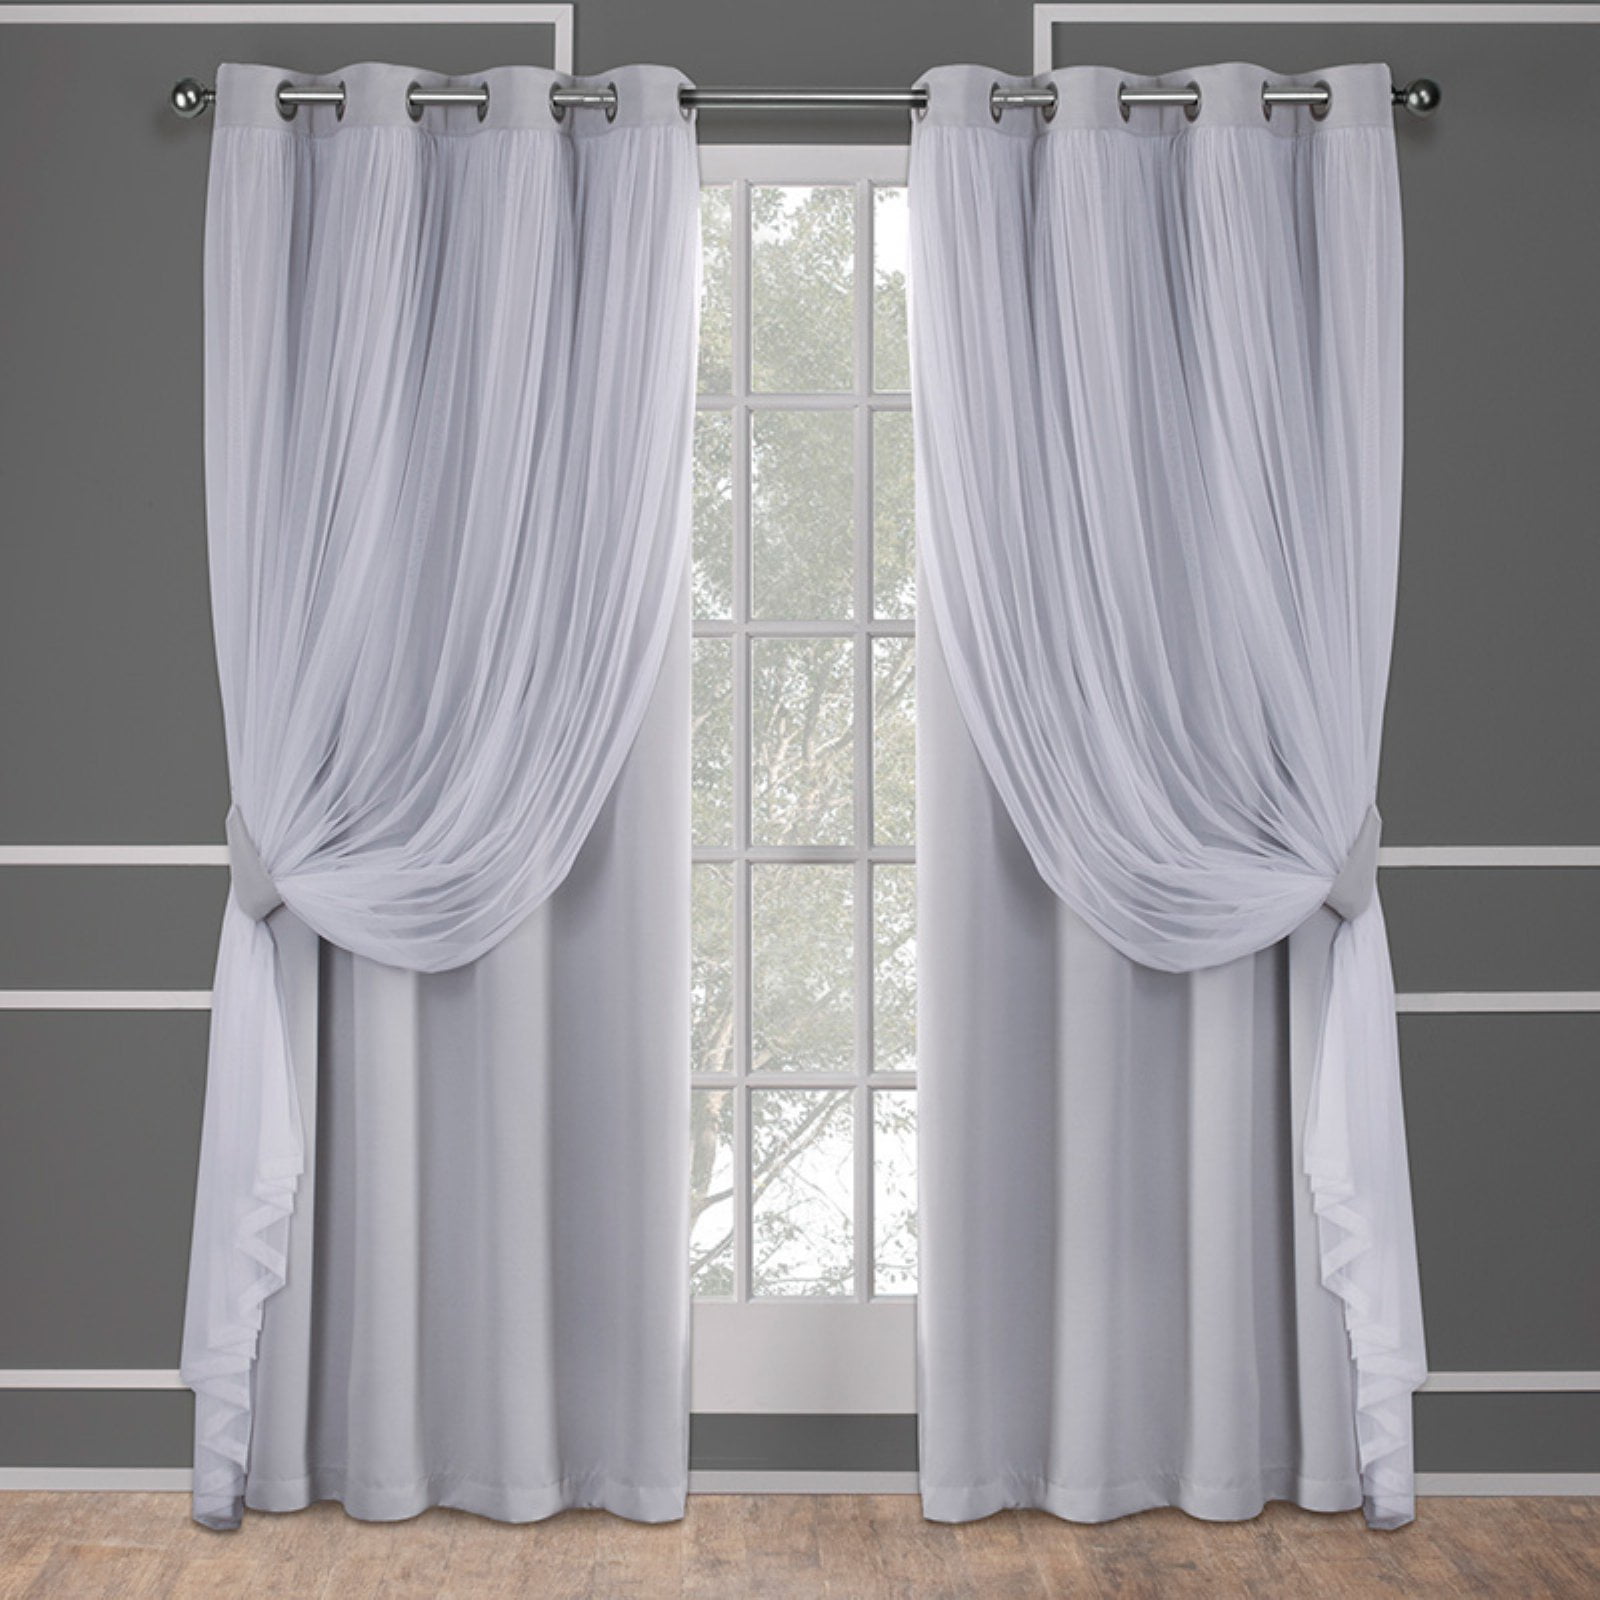 The Vampire Diaries 2PCS Thermal Window Curtain Panel Living Room Curtain Drapes 